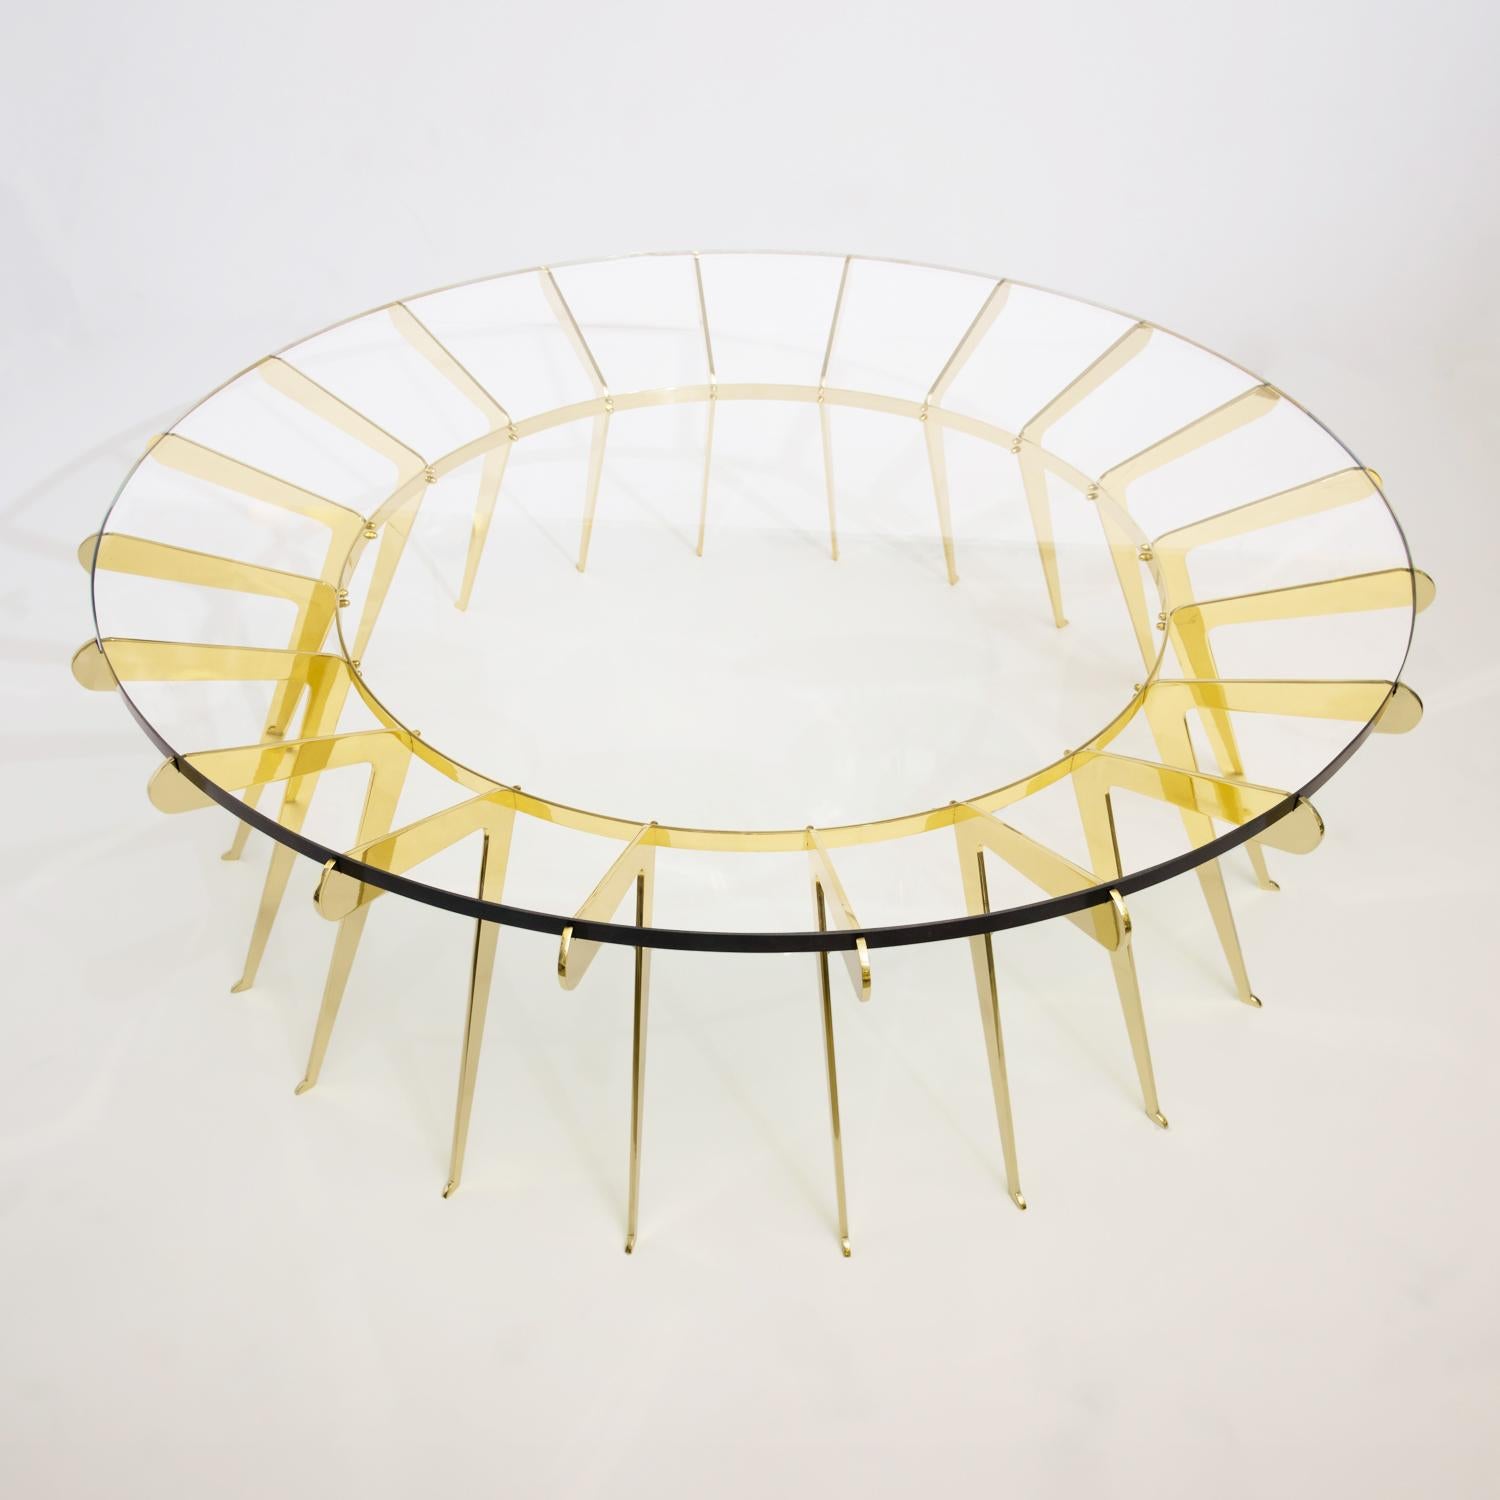 The Solare table plays on the concept of strength in numbers where numerous delicately designed brass legs come together to hold a thick clear glass top. Shown in polished brass with a 51” diameter.

Customization Options: 

Each piece is hand